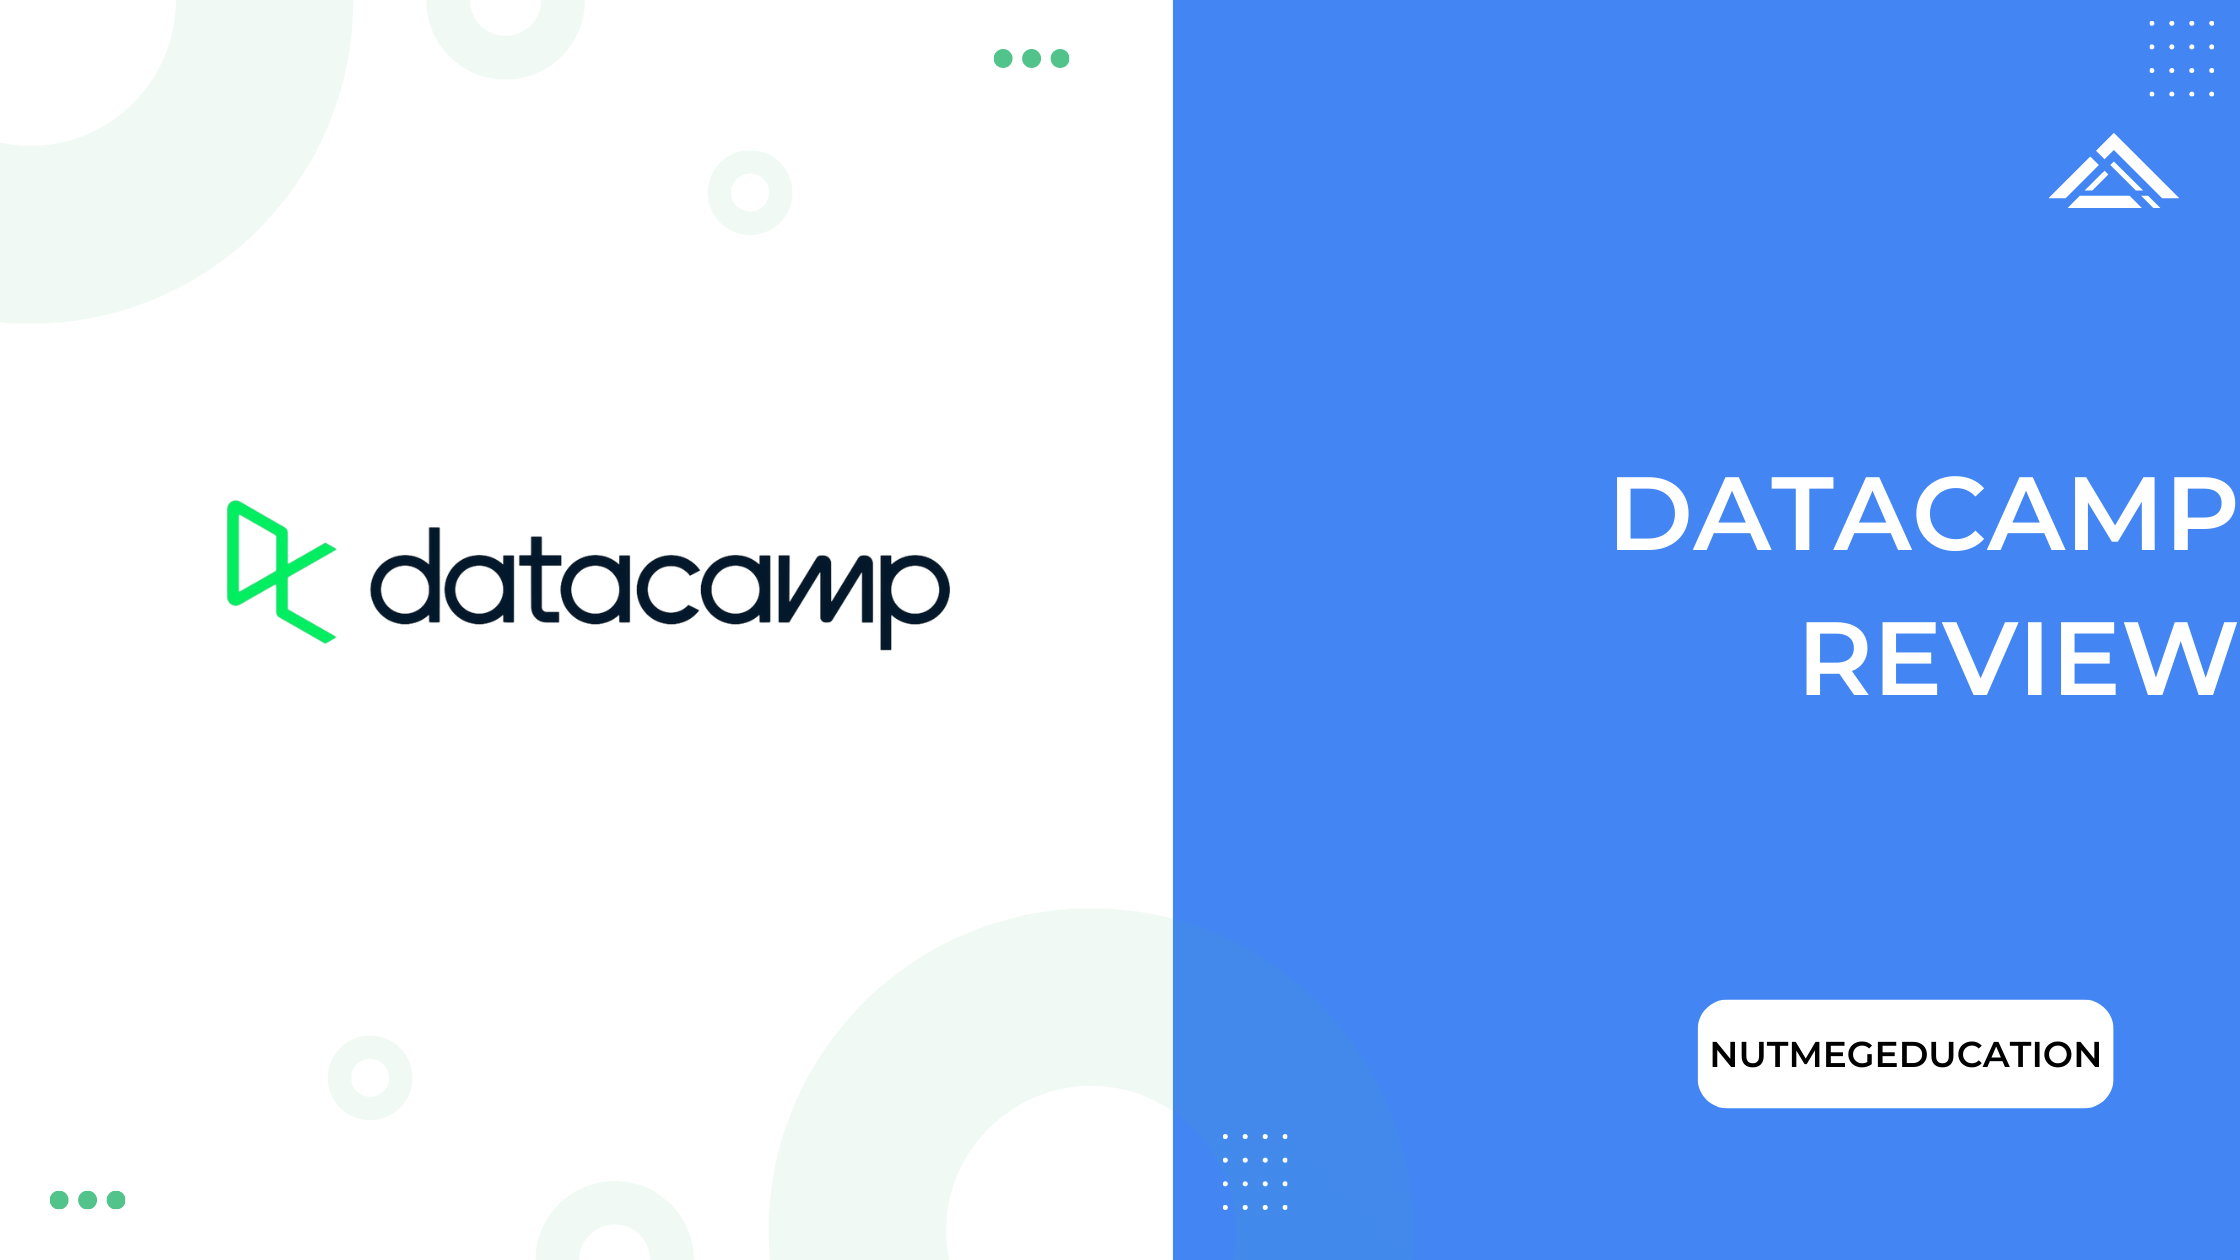 DataCamp Review - NutMegEducation